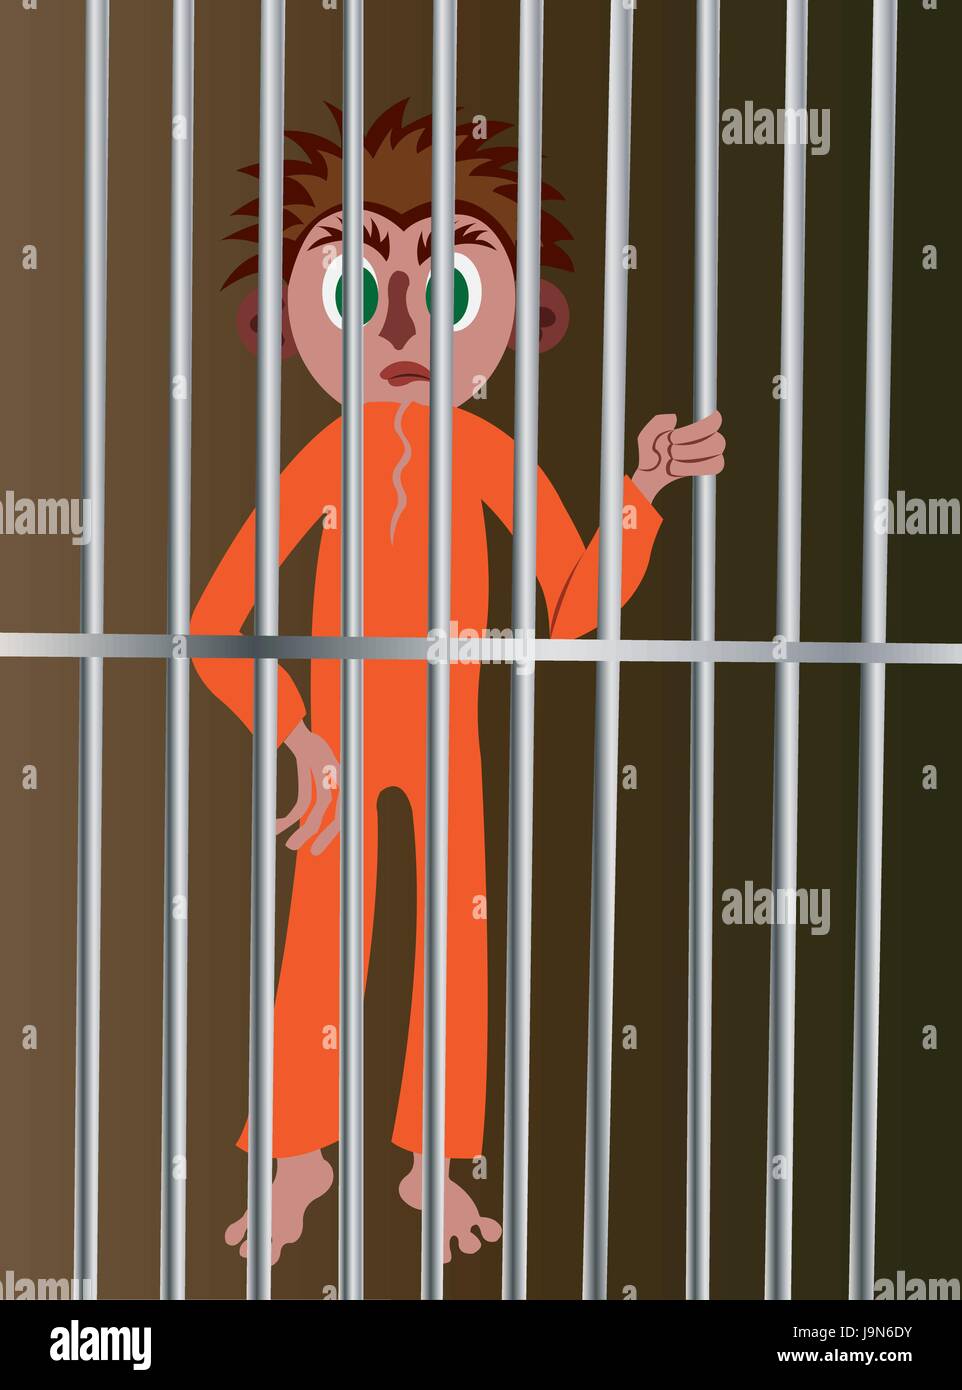 an inmate standing behind bars, Stock Vector